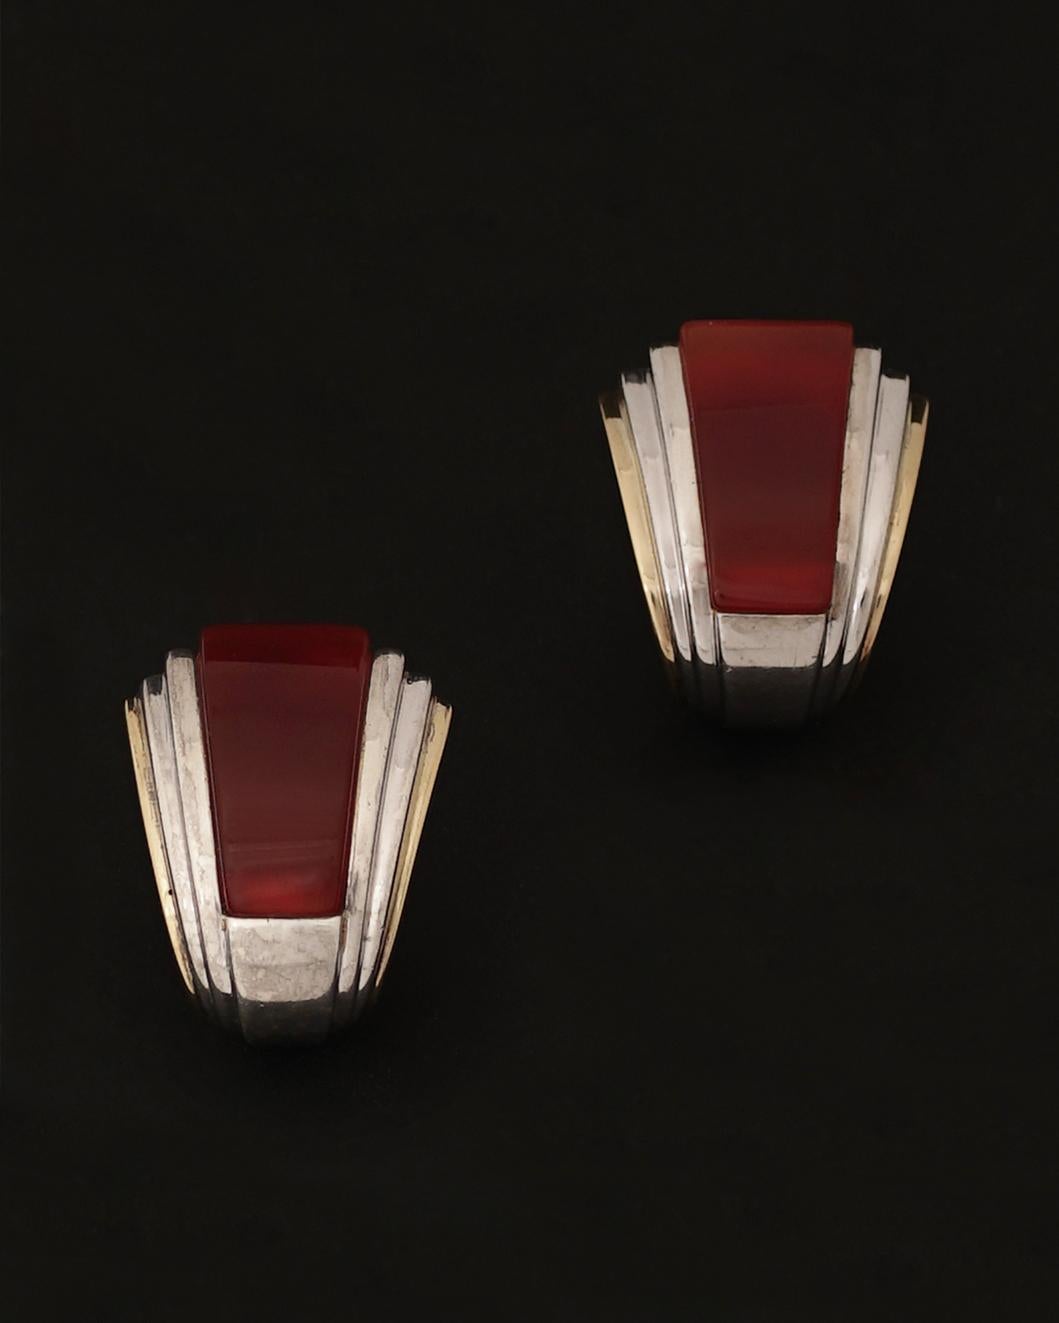 Puiforcat
Clip-on Earrings, Circa 1970
18K Gold, Silver, Carnelian
Signed PUIFORCAT (Photo 6), French Hallmarks for gold and Silver (Photos 7 and 8)
Weight : 28,50g

Wonderful and rare Puiforcat Earrings inspired by Art Deco design that can also be